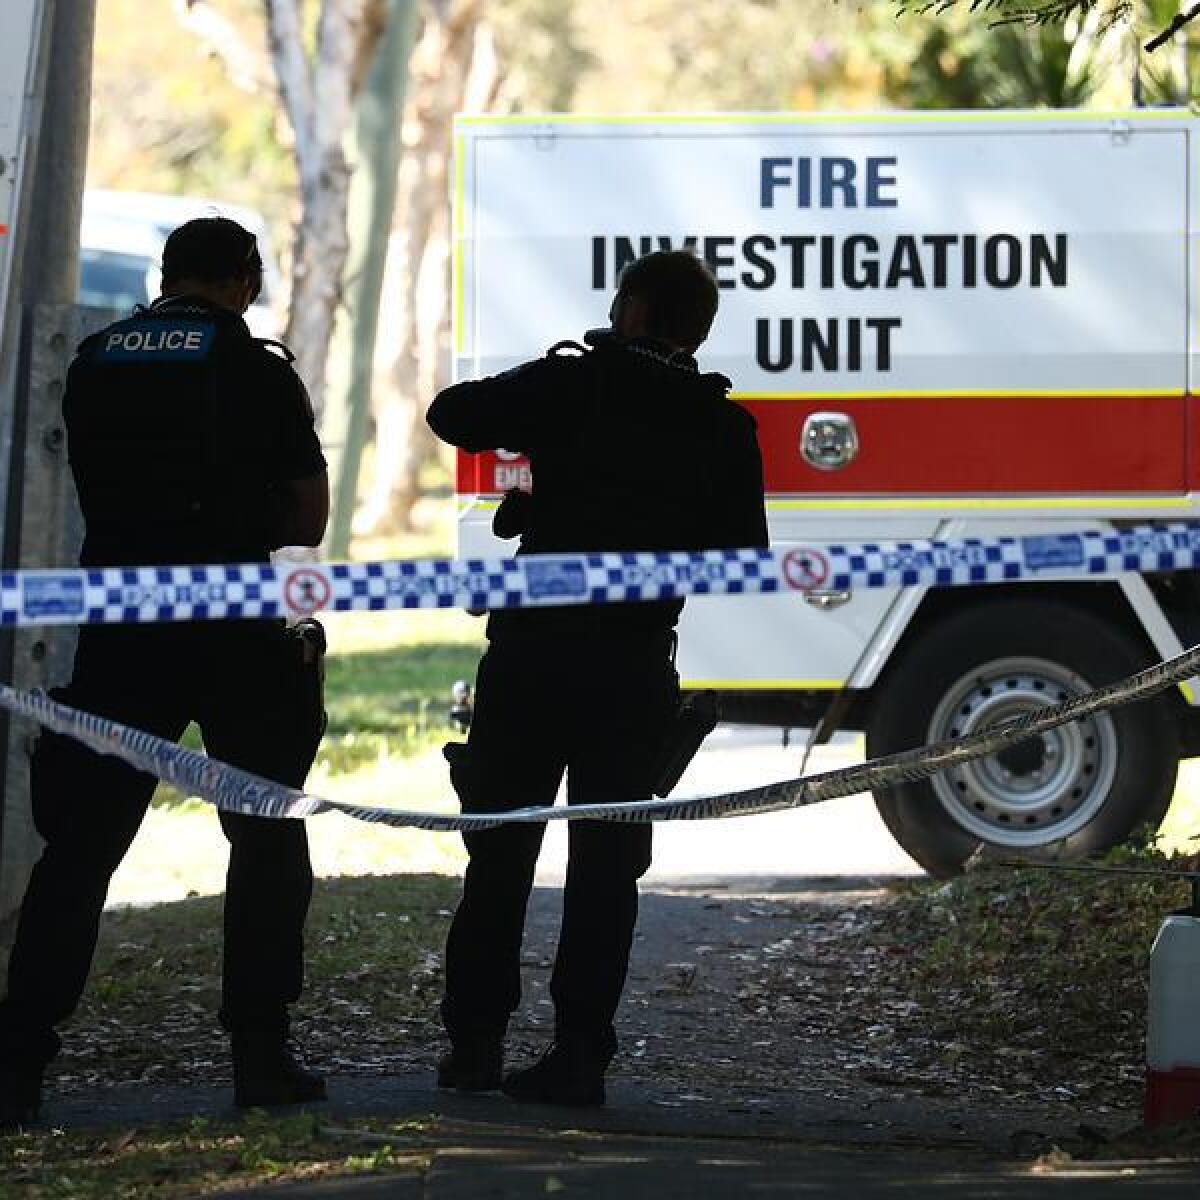 Police and the fire investigations unit